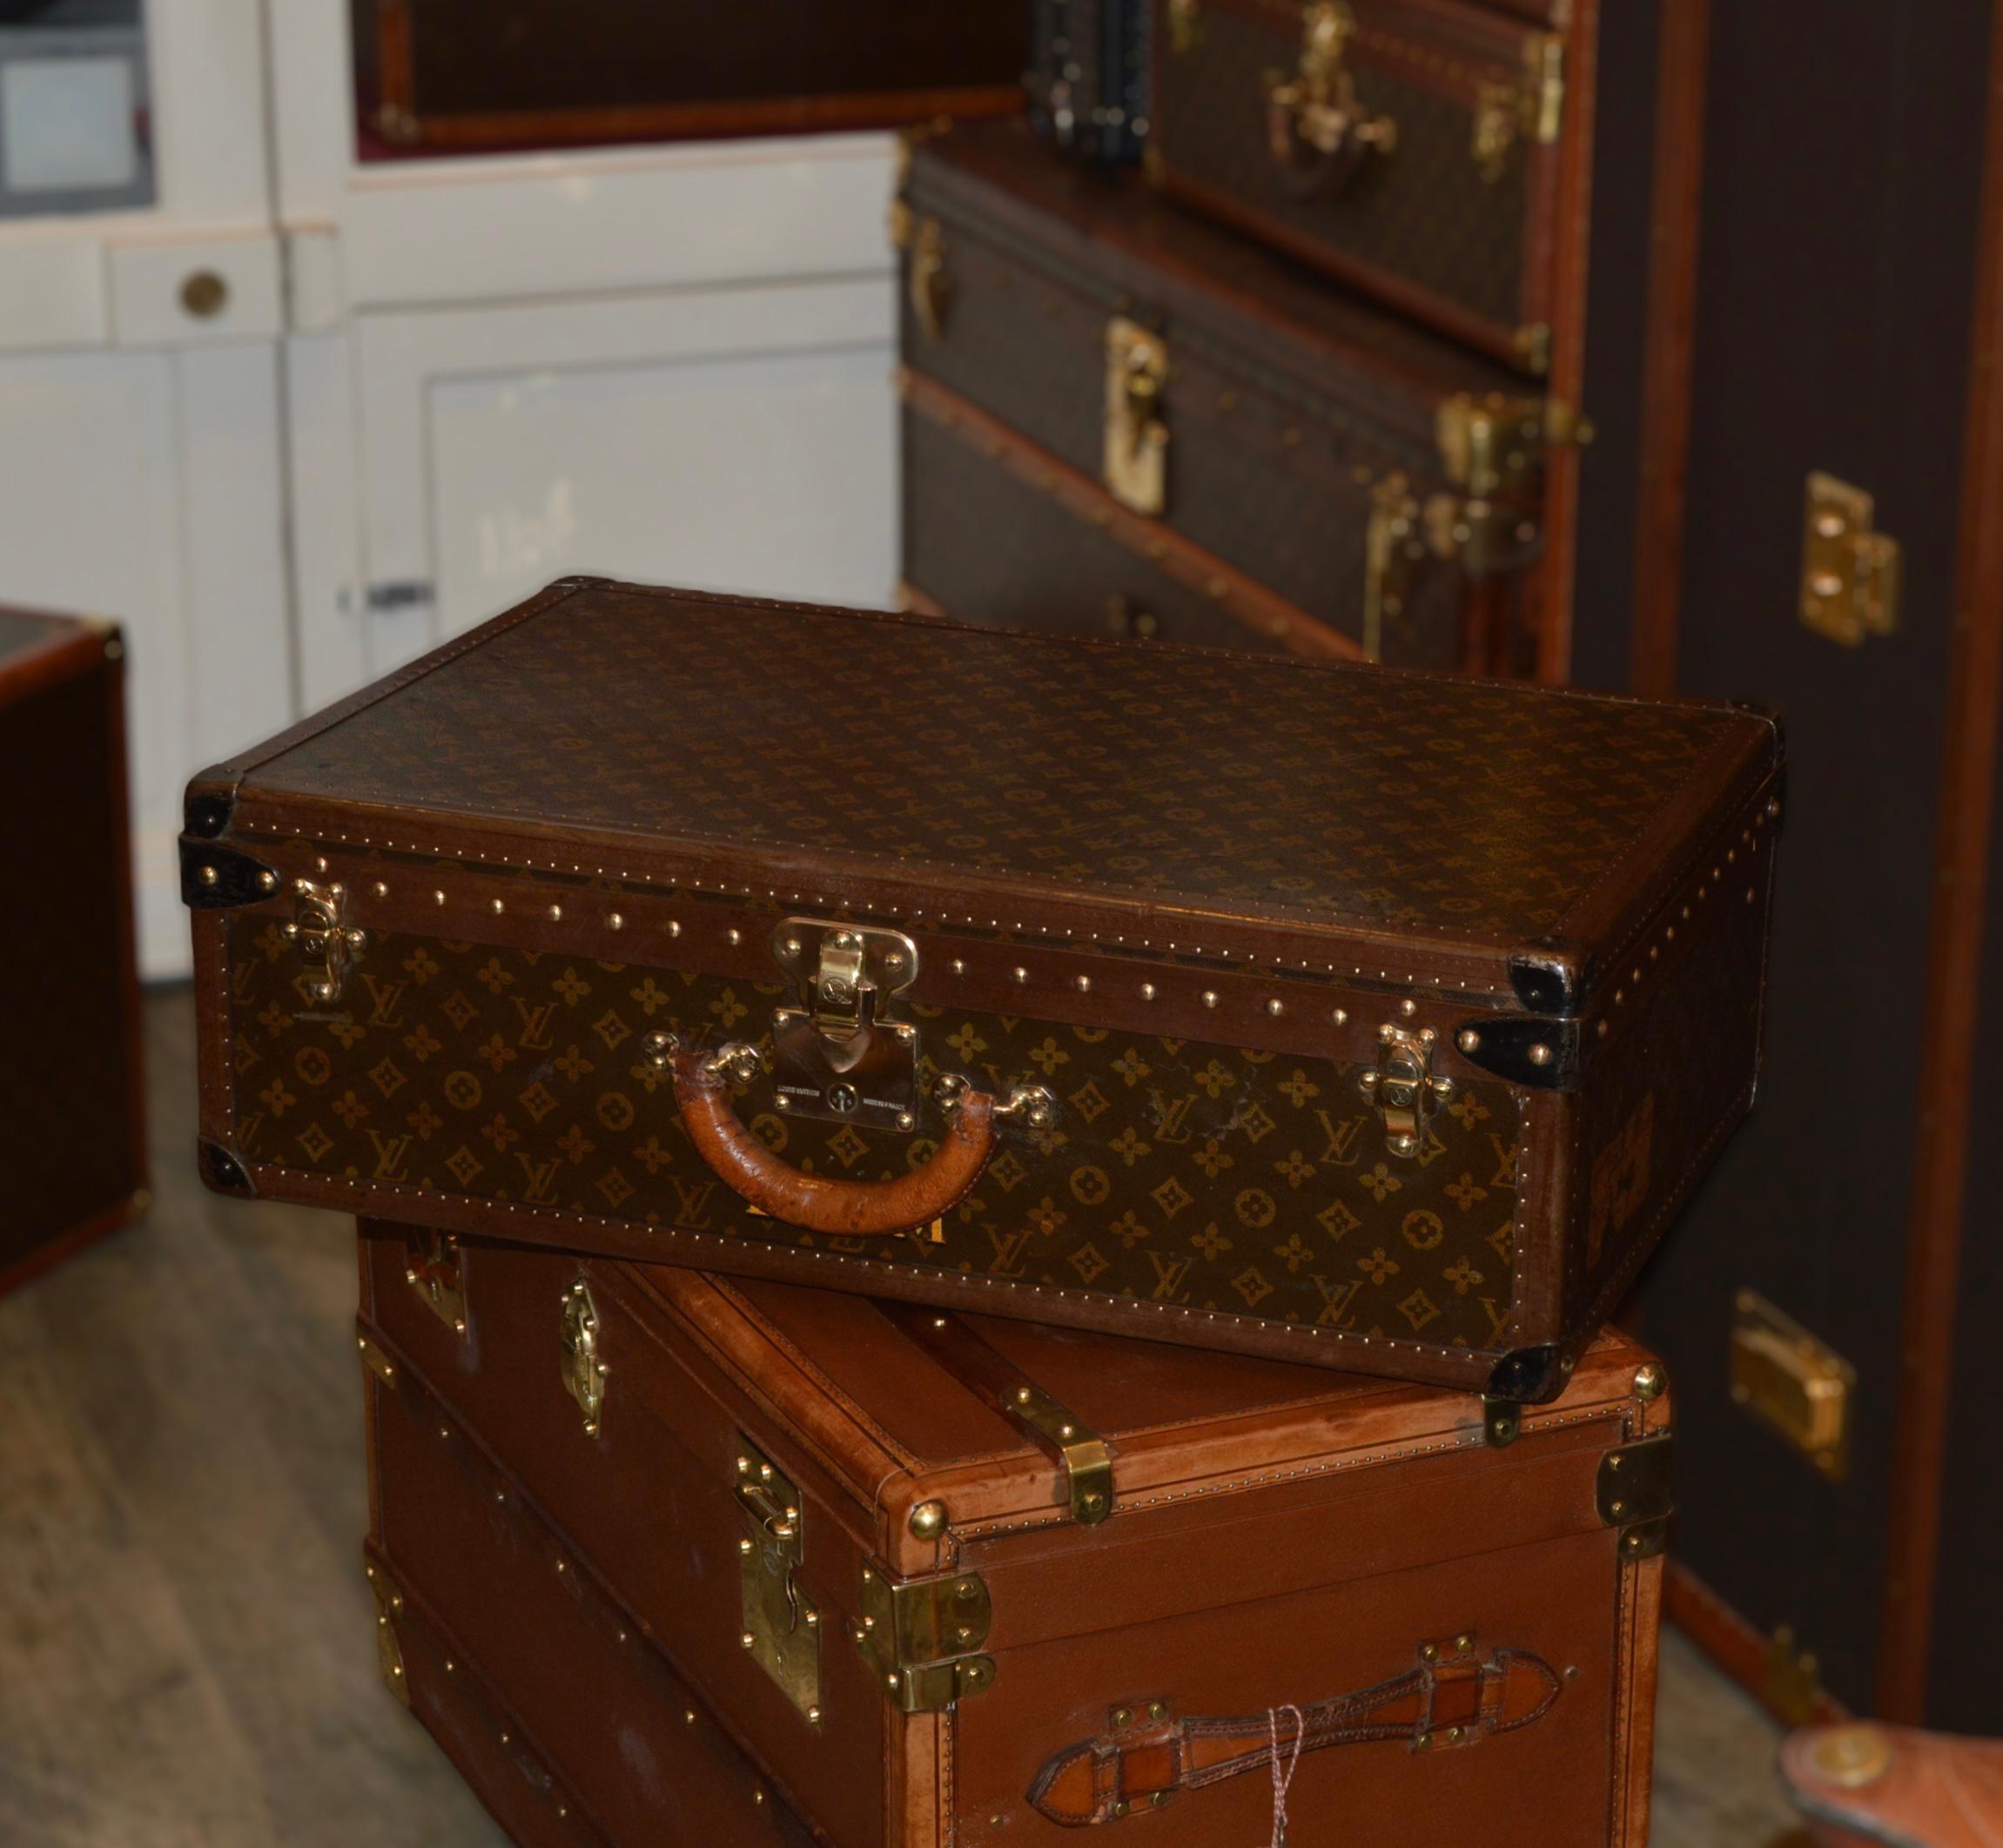 Superb and rare Alzer Louis Vuitton trunk covered with a canvas coated with a stencil monogram and protected by dark lozine borders. The case is equipped with a leather handle and three brass clasps stamped 